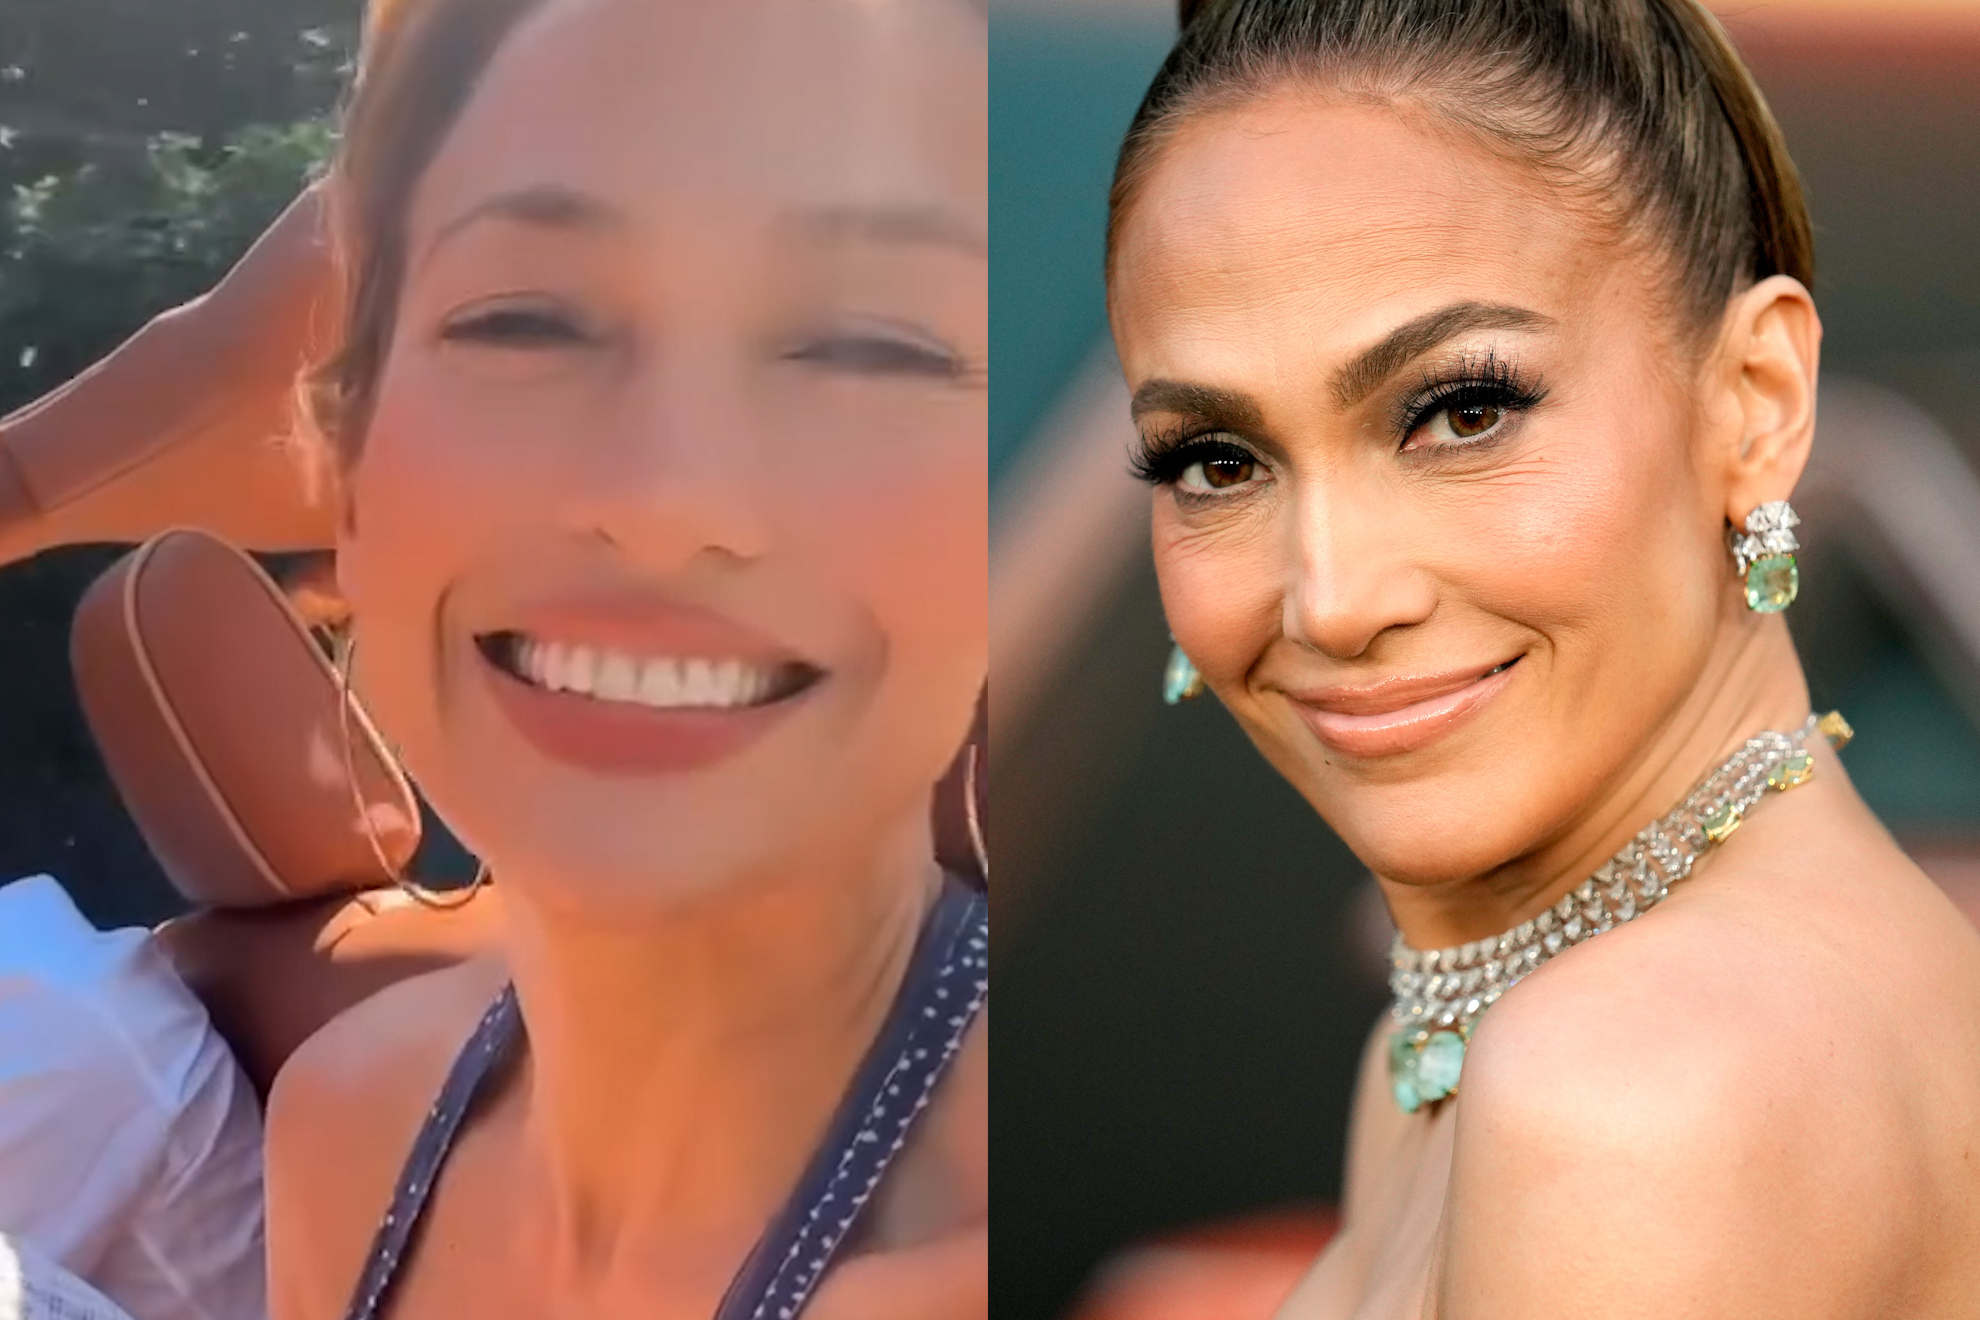 Jennifer Lopez shows her happiness this 4th of July with someone other than Ben Affleck